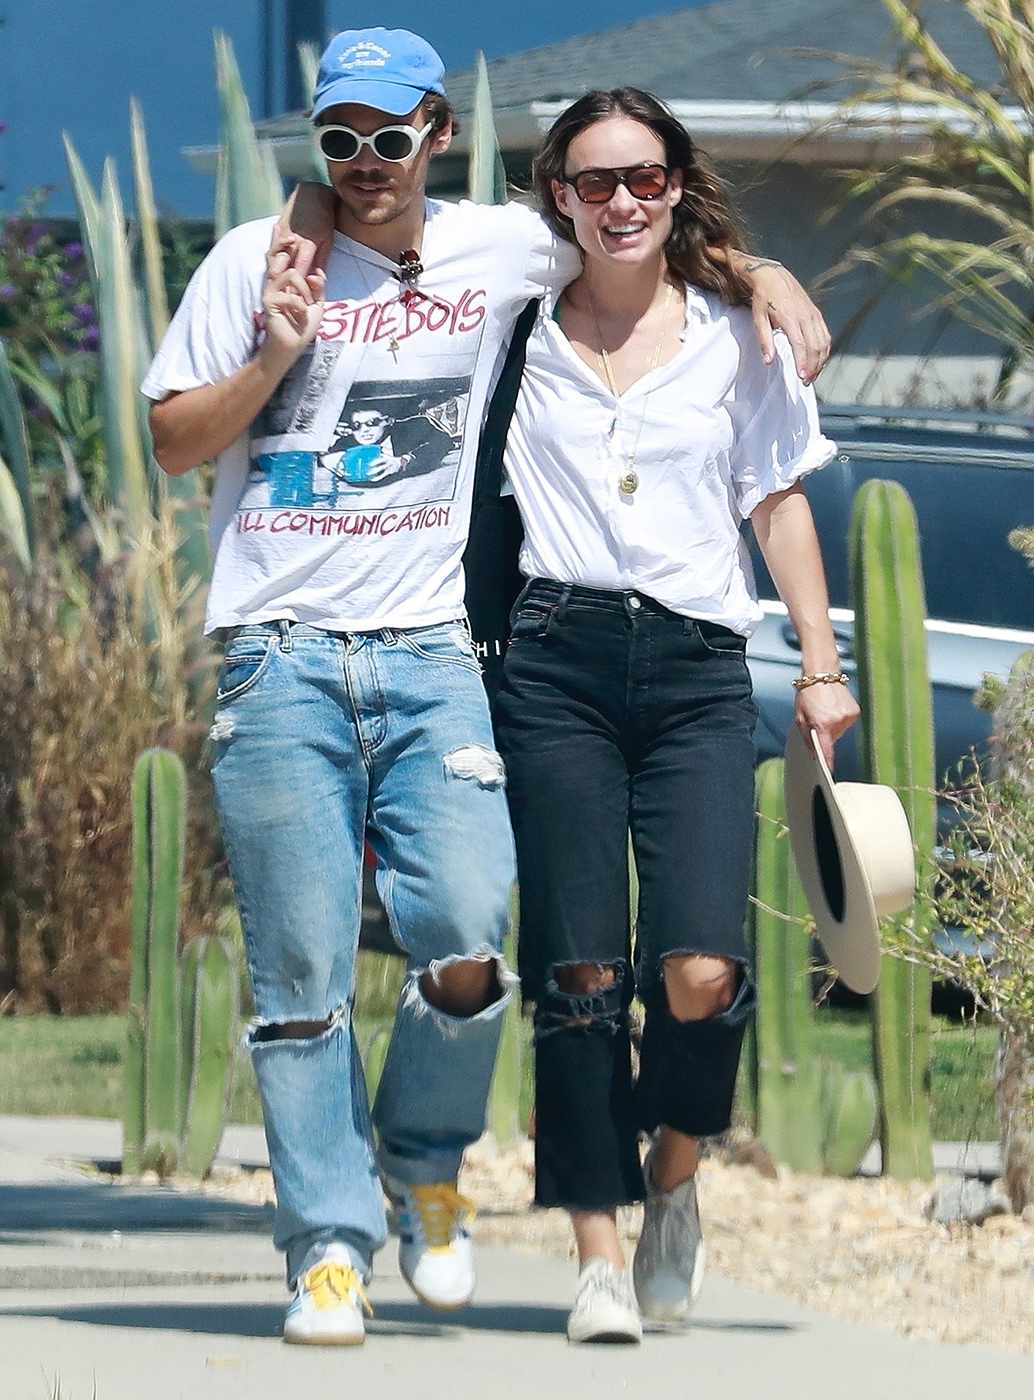 Harry Styles and girlfriend Olivia Wilde looked all loved up while out for a stroll after enjoying lunch together on Sunday afternoon